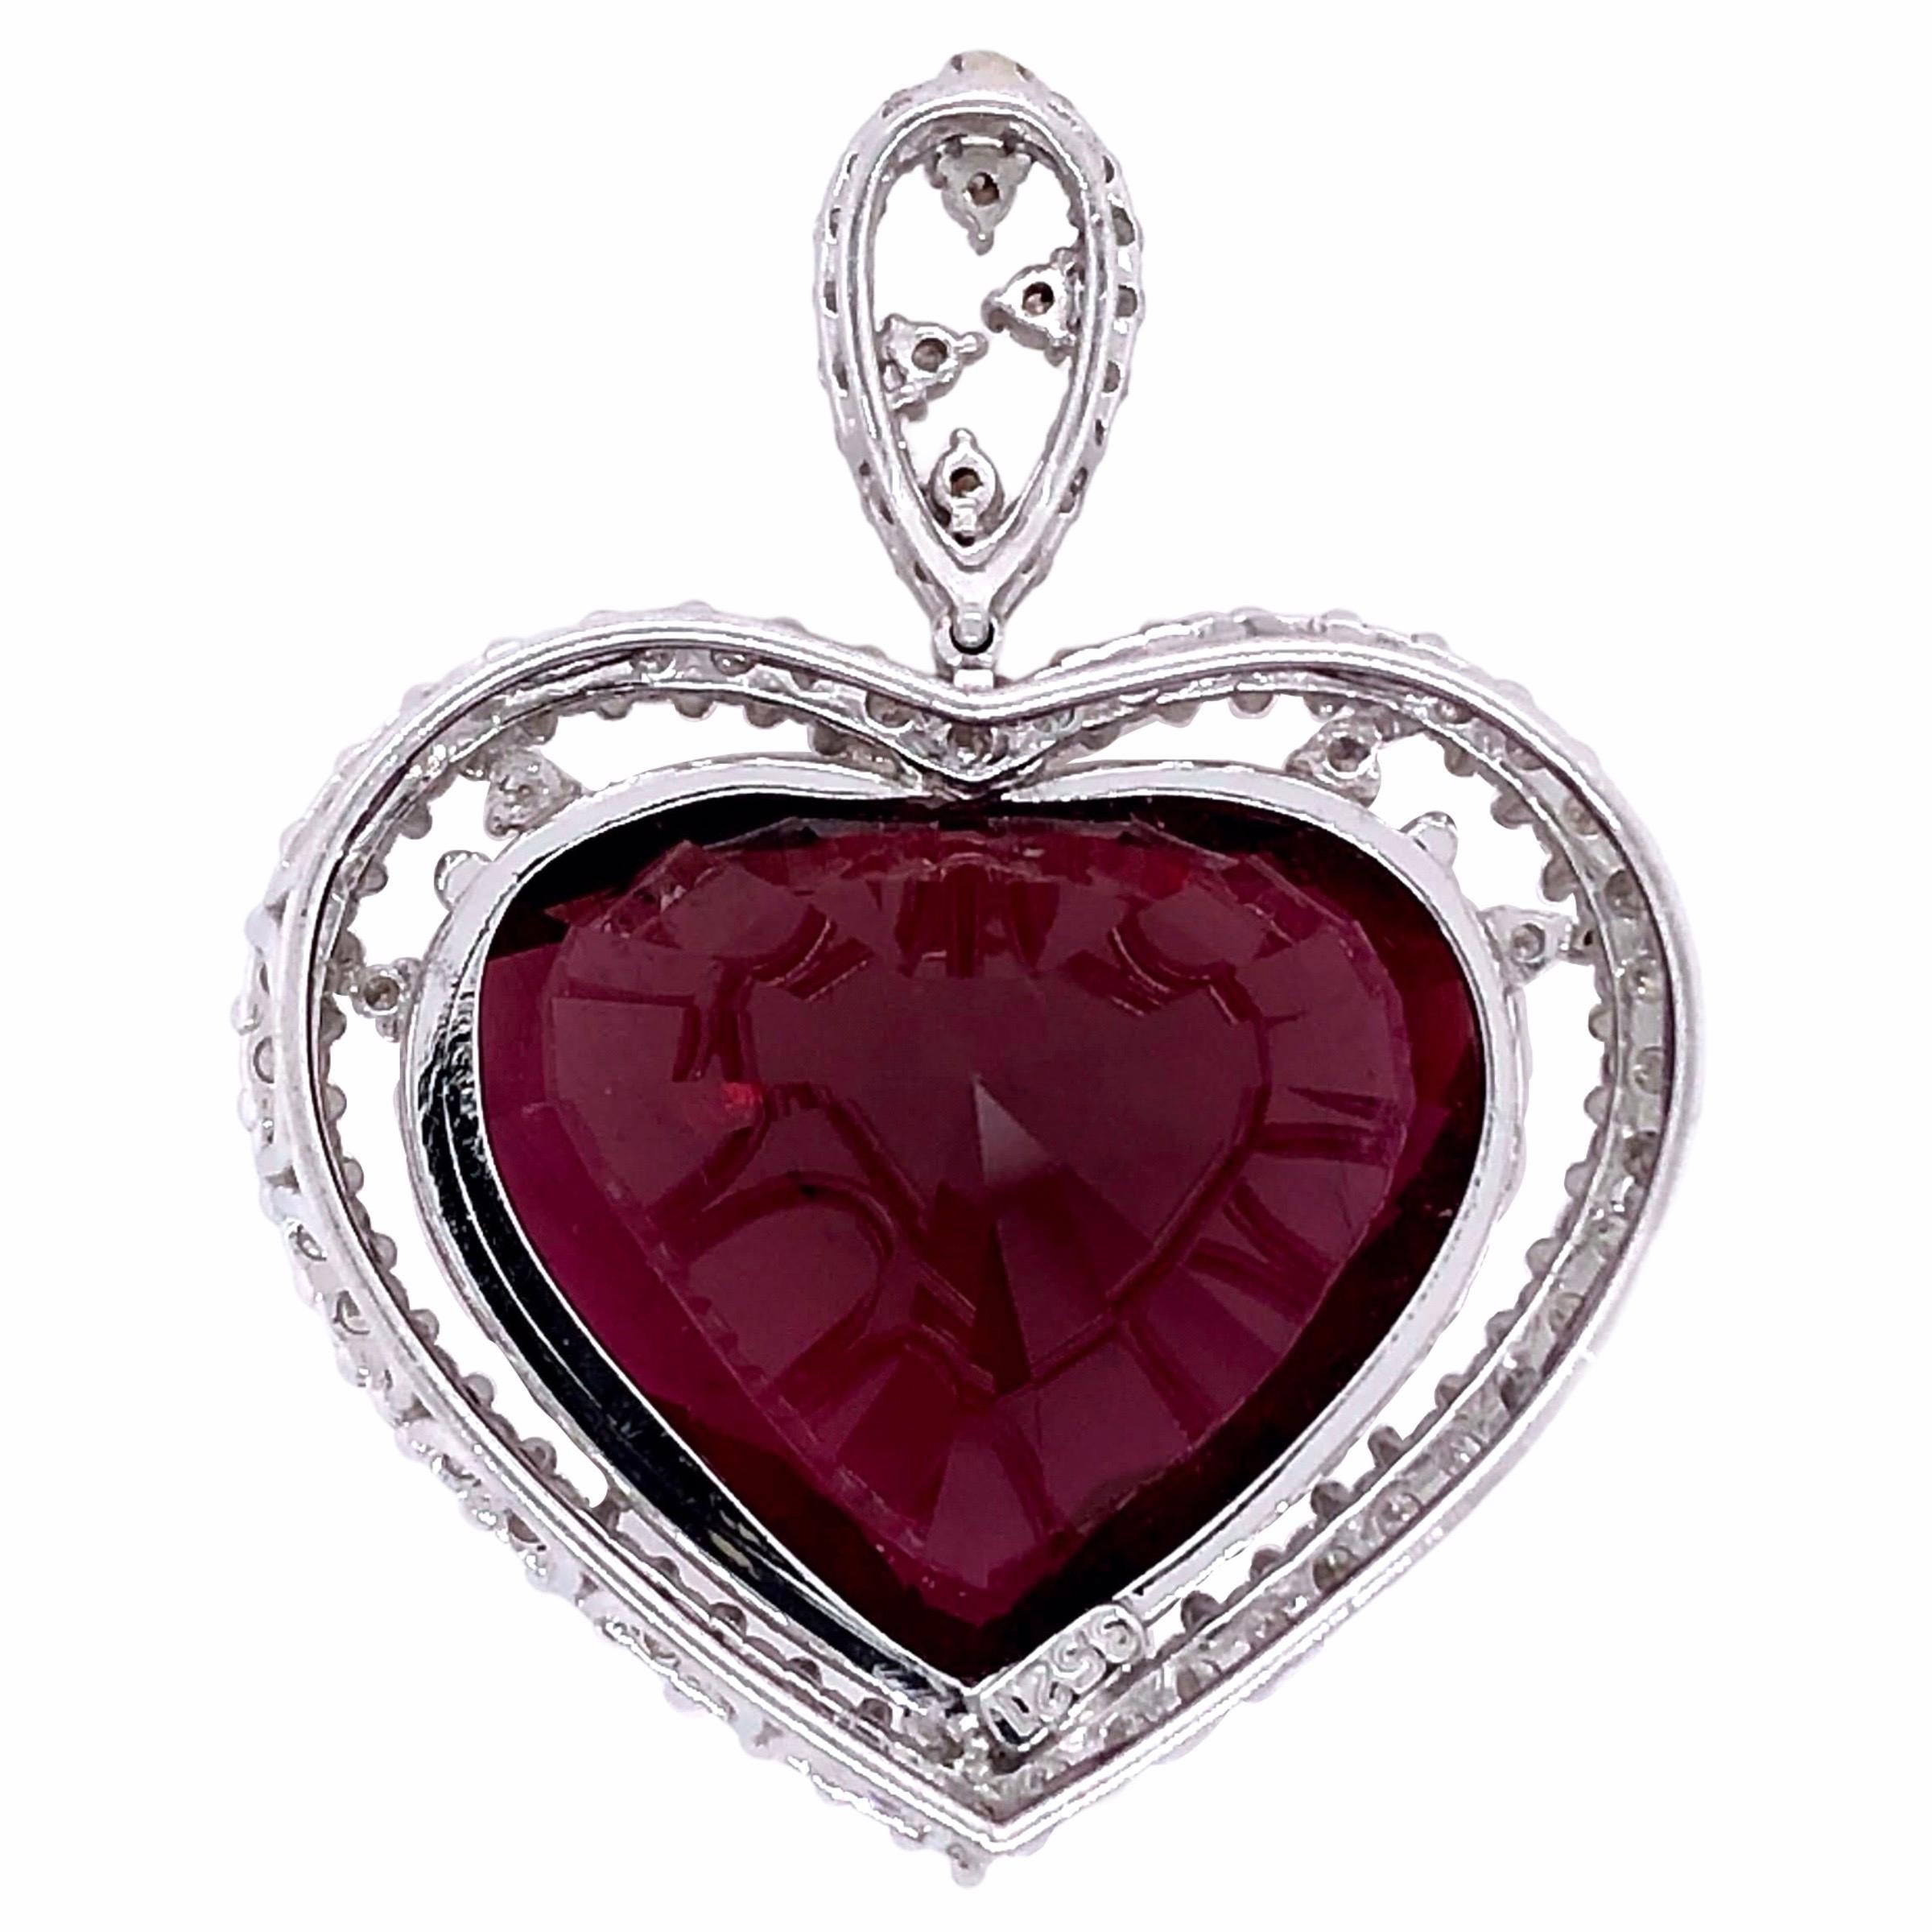 PARIS Craft House 35.21ct Rubellite Diamond Heart Pendant in 18 Karat White Gold.

- 1 Heart-cut Rubellite/35.21ct
- Pavé Diamonds
- 18K White Gold

Designed and crafted at PARIS Craft House.